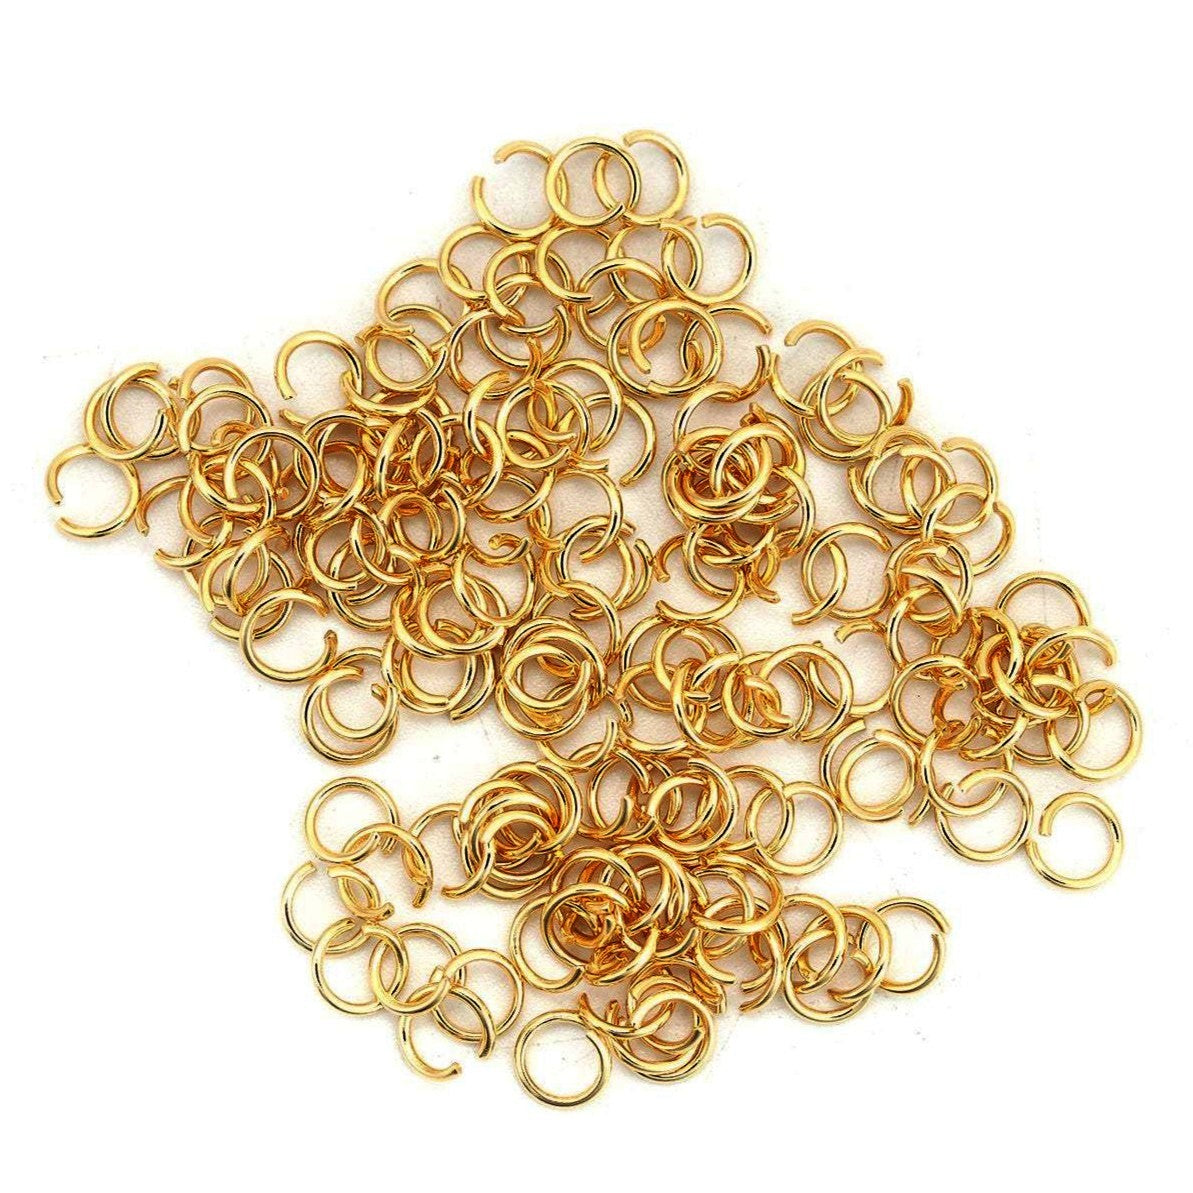 2000 pcs Gold Jump Rings - 5mm Jump Rings for Jewelry Making, Open Jump  Rings - O Rings for Jewelry Making，Jewelry Jump Rings for Keychains - Jump